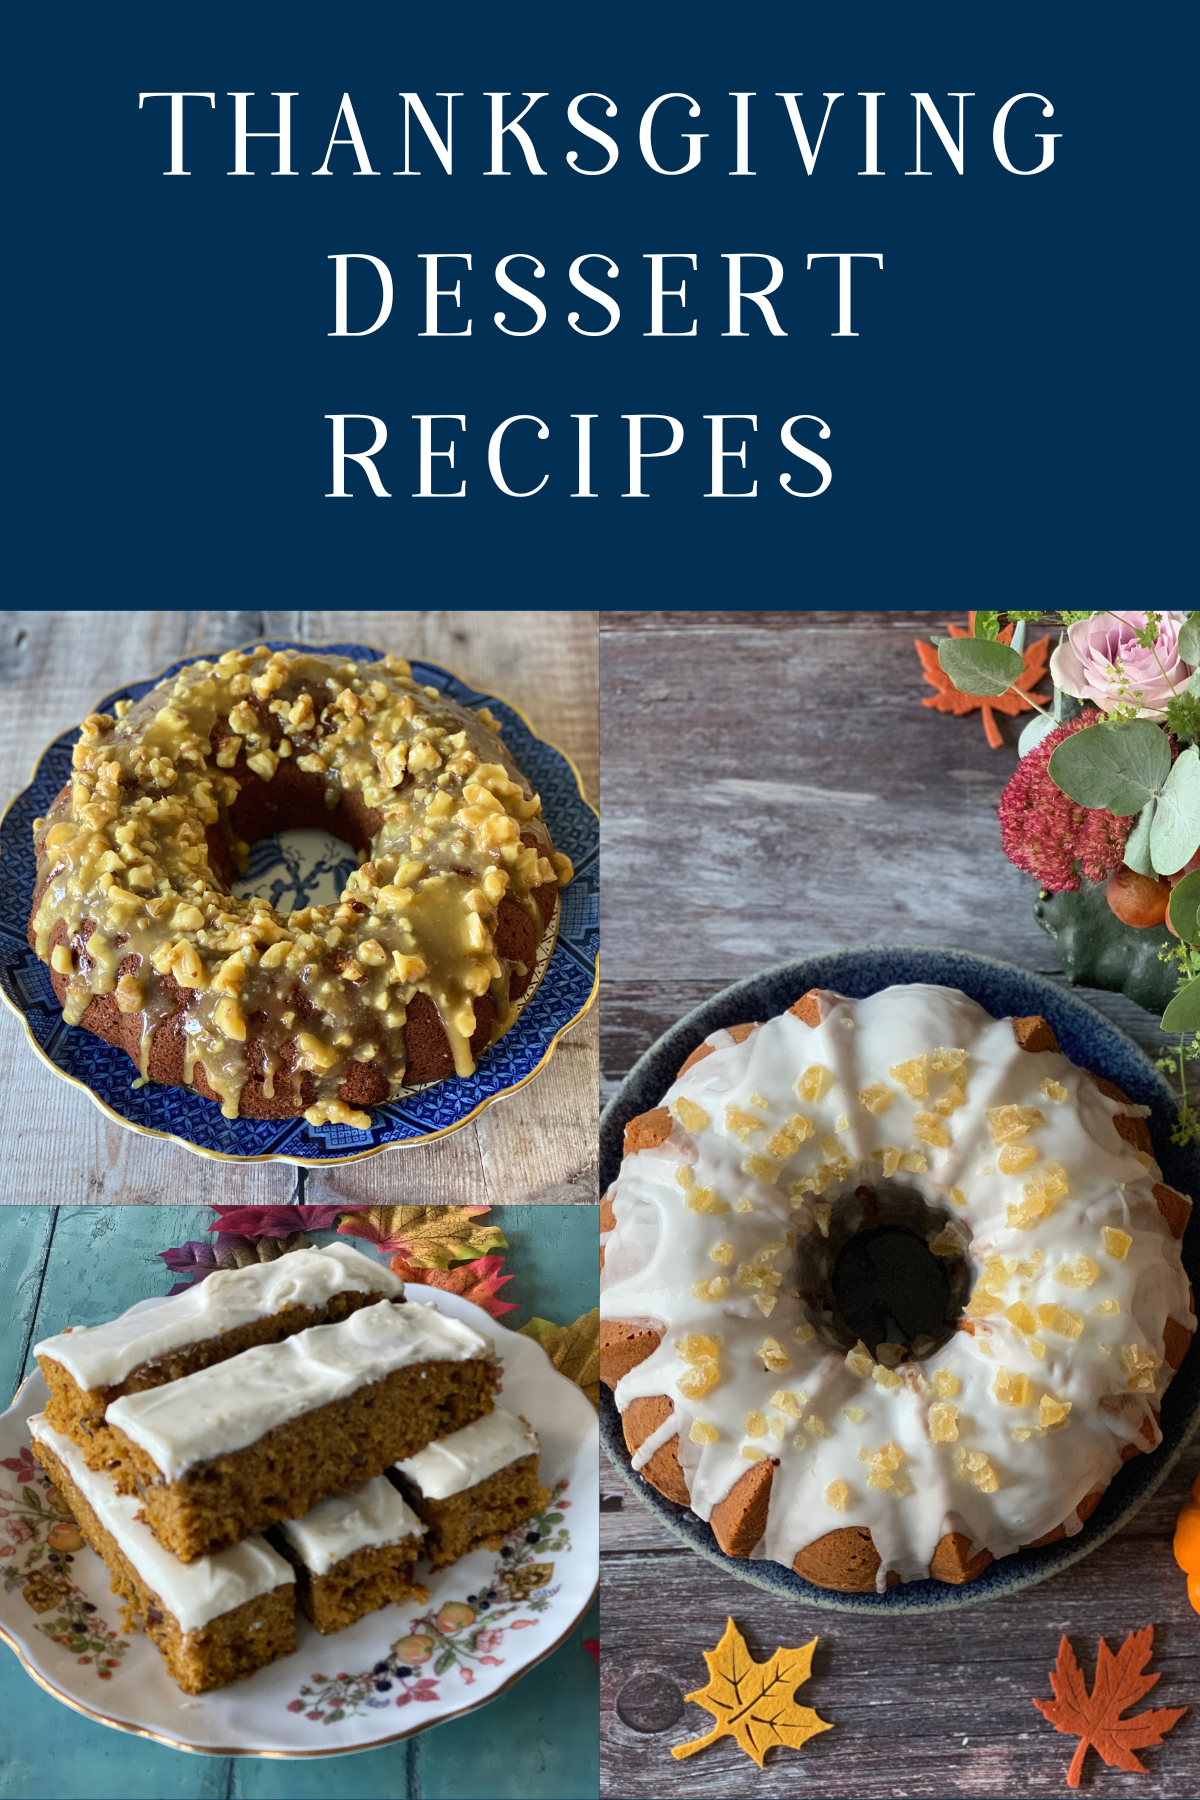 3 Thanksgiving Dessert Recipes including 2 Bundt Cakes and some slices of sheet cake